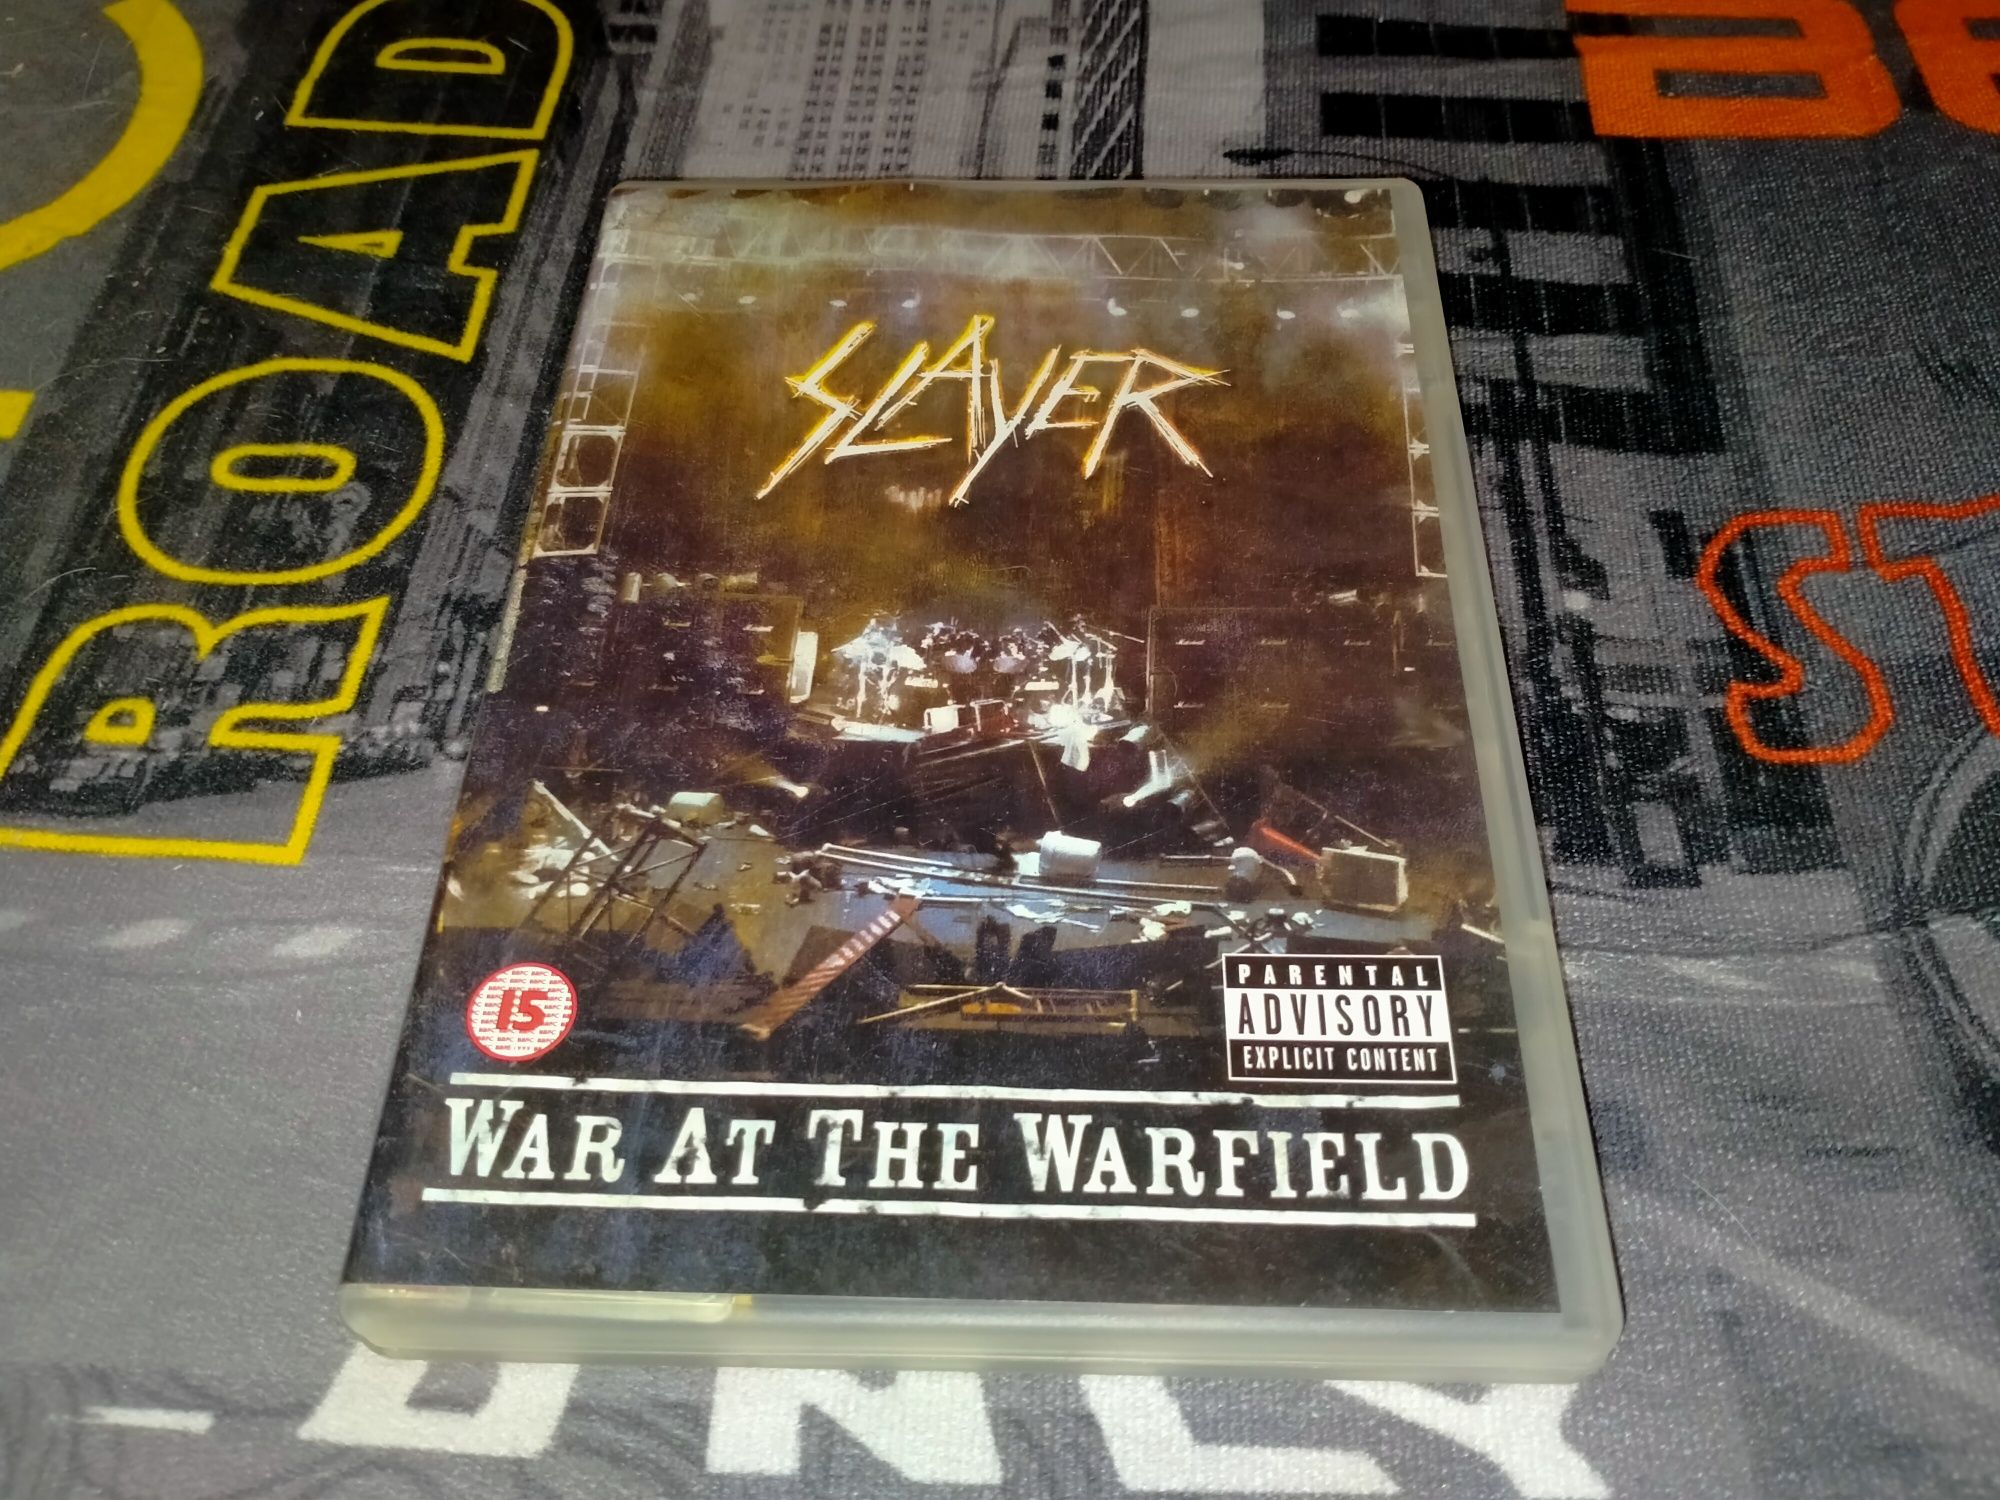 Slipknot "Up to our Necks" и Slayer "War at the Warfield"